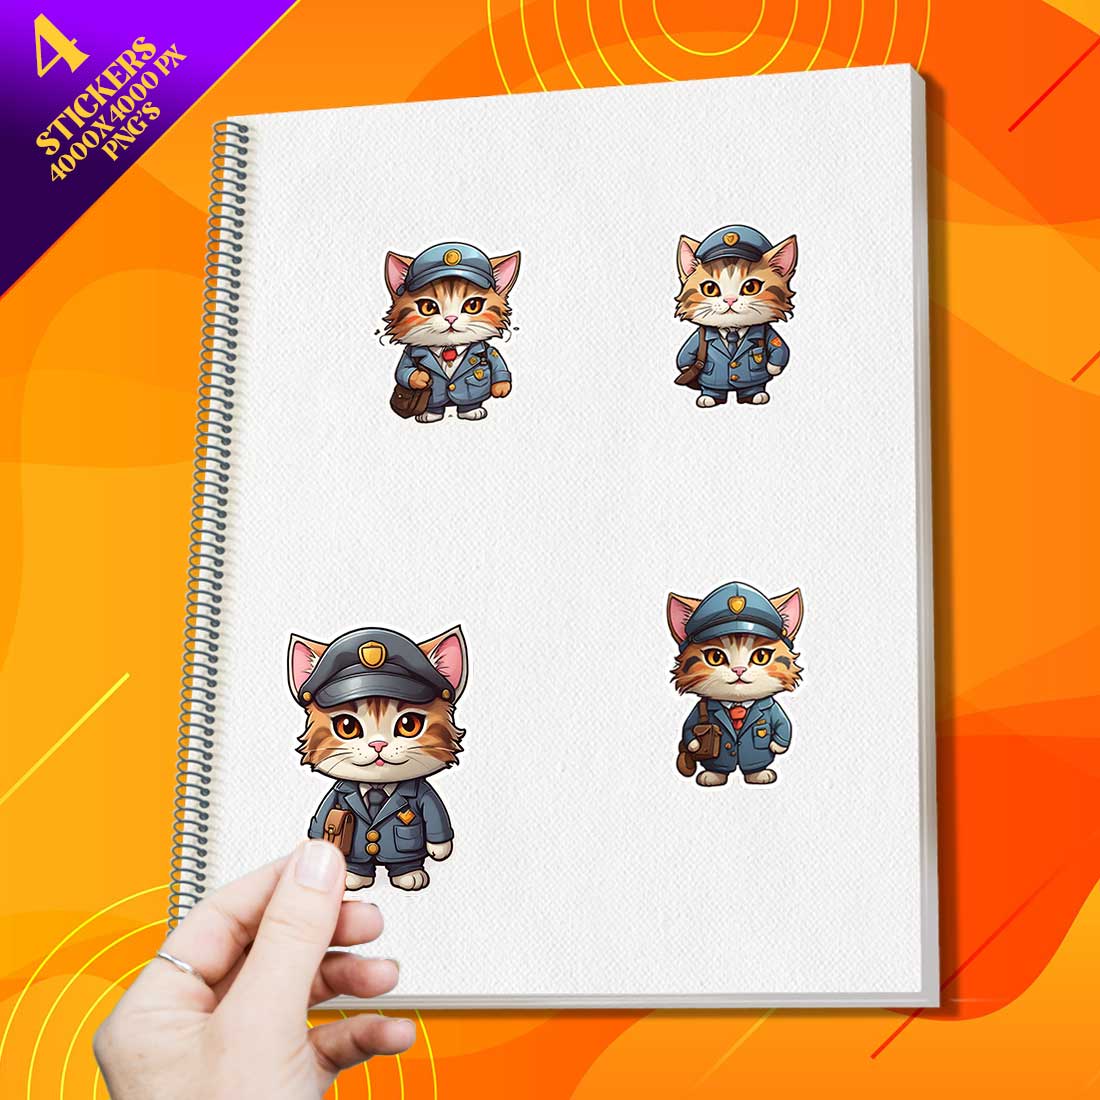 Cute Postman Cat Stickers PNG’s cover image.